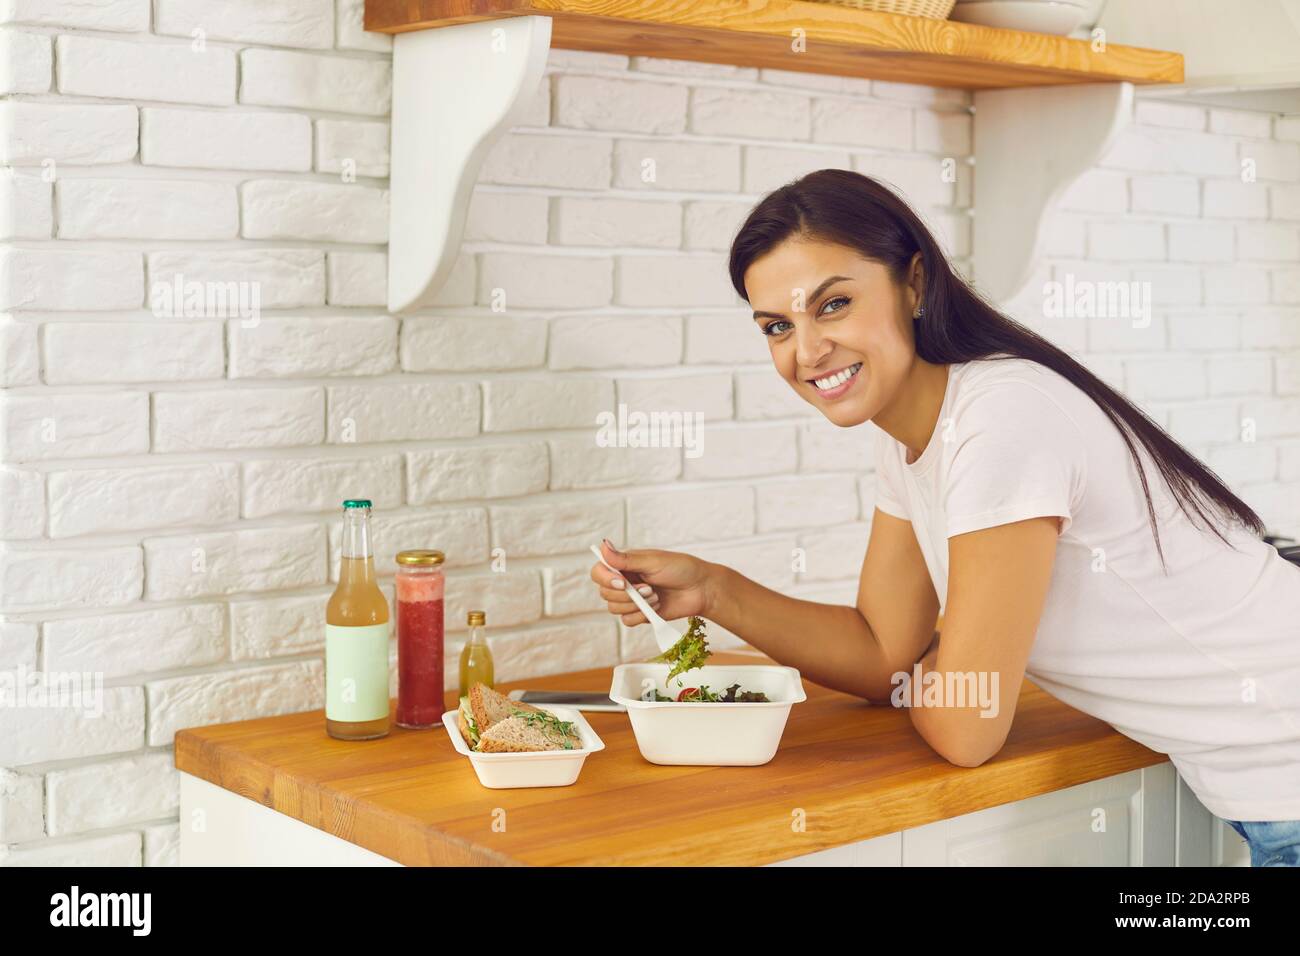 Portrait of happy woman eating lunch salad and takeaway food delivered by delivery service. Stock Photo